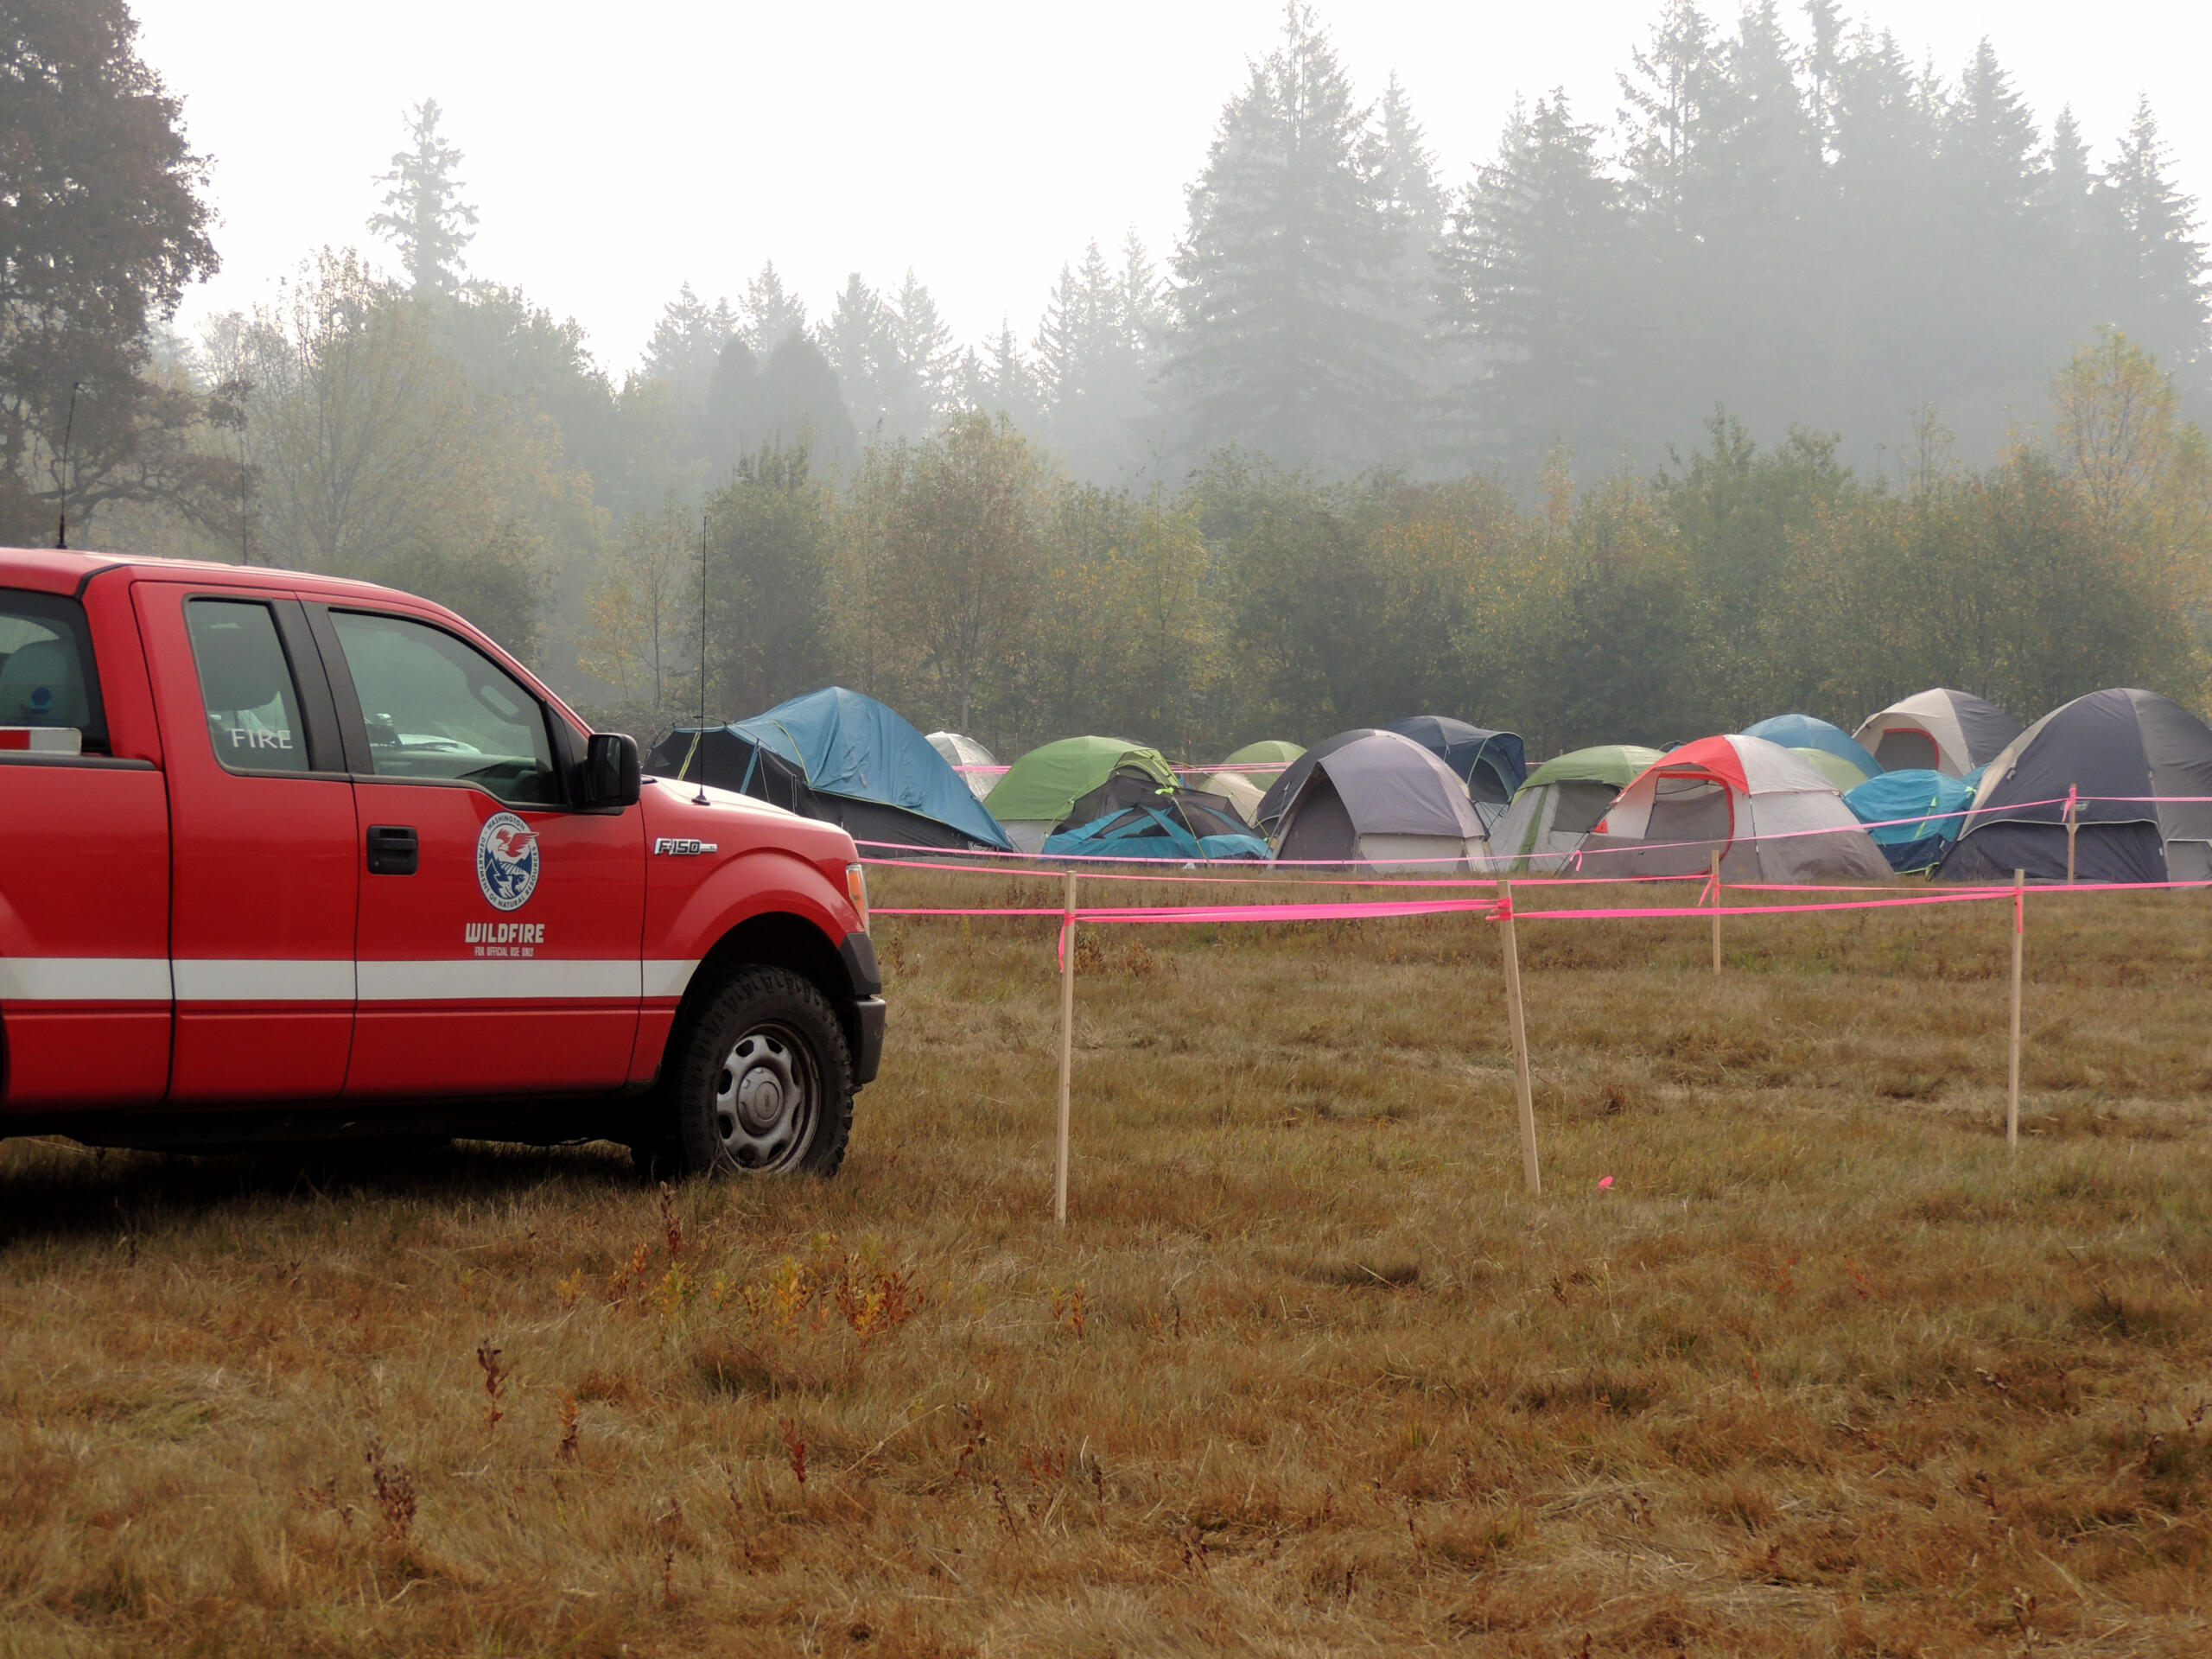 Tents begin to fill a field across from Grove Field in Camas for firefighters battling the Nakia Creek Fire. The camp will include meal areas, showers and everything crews need to rest up before heading back to the fire.